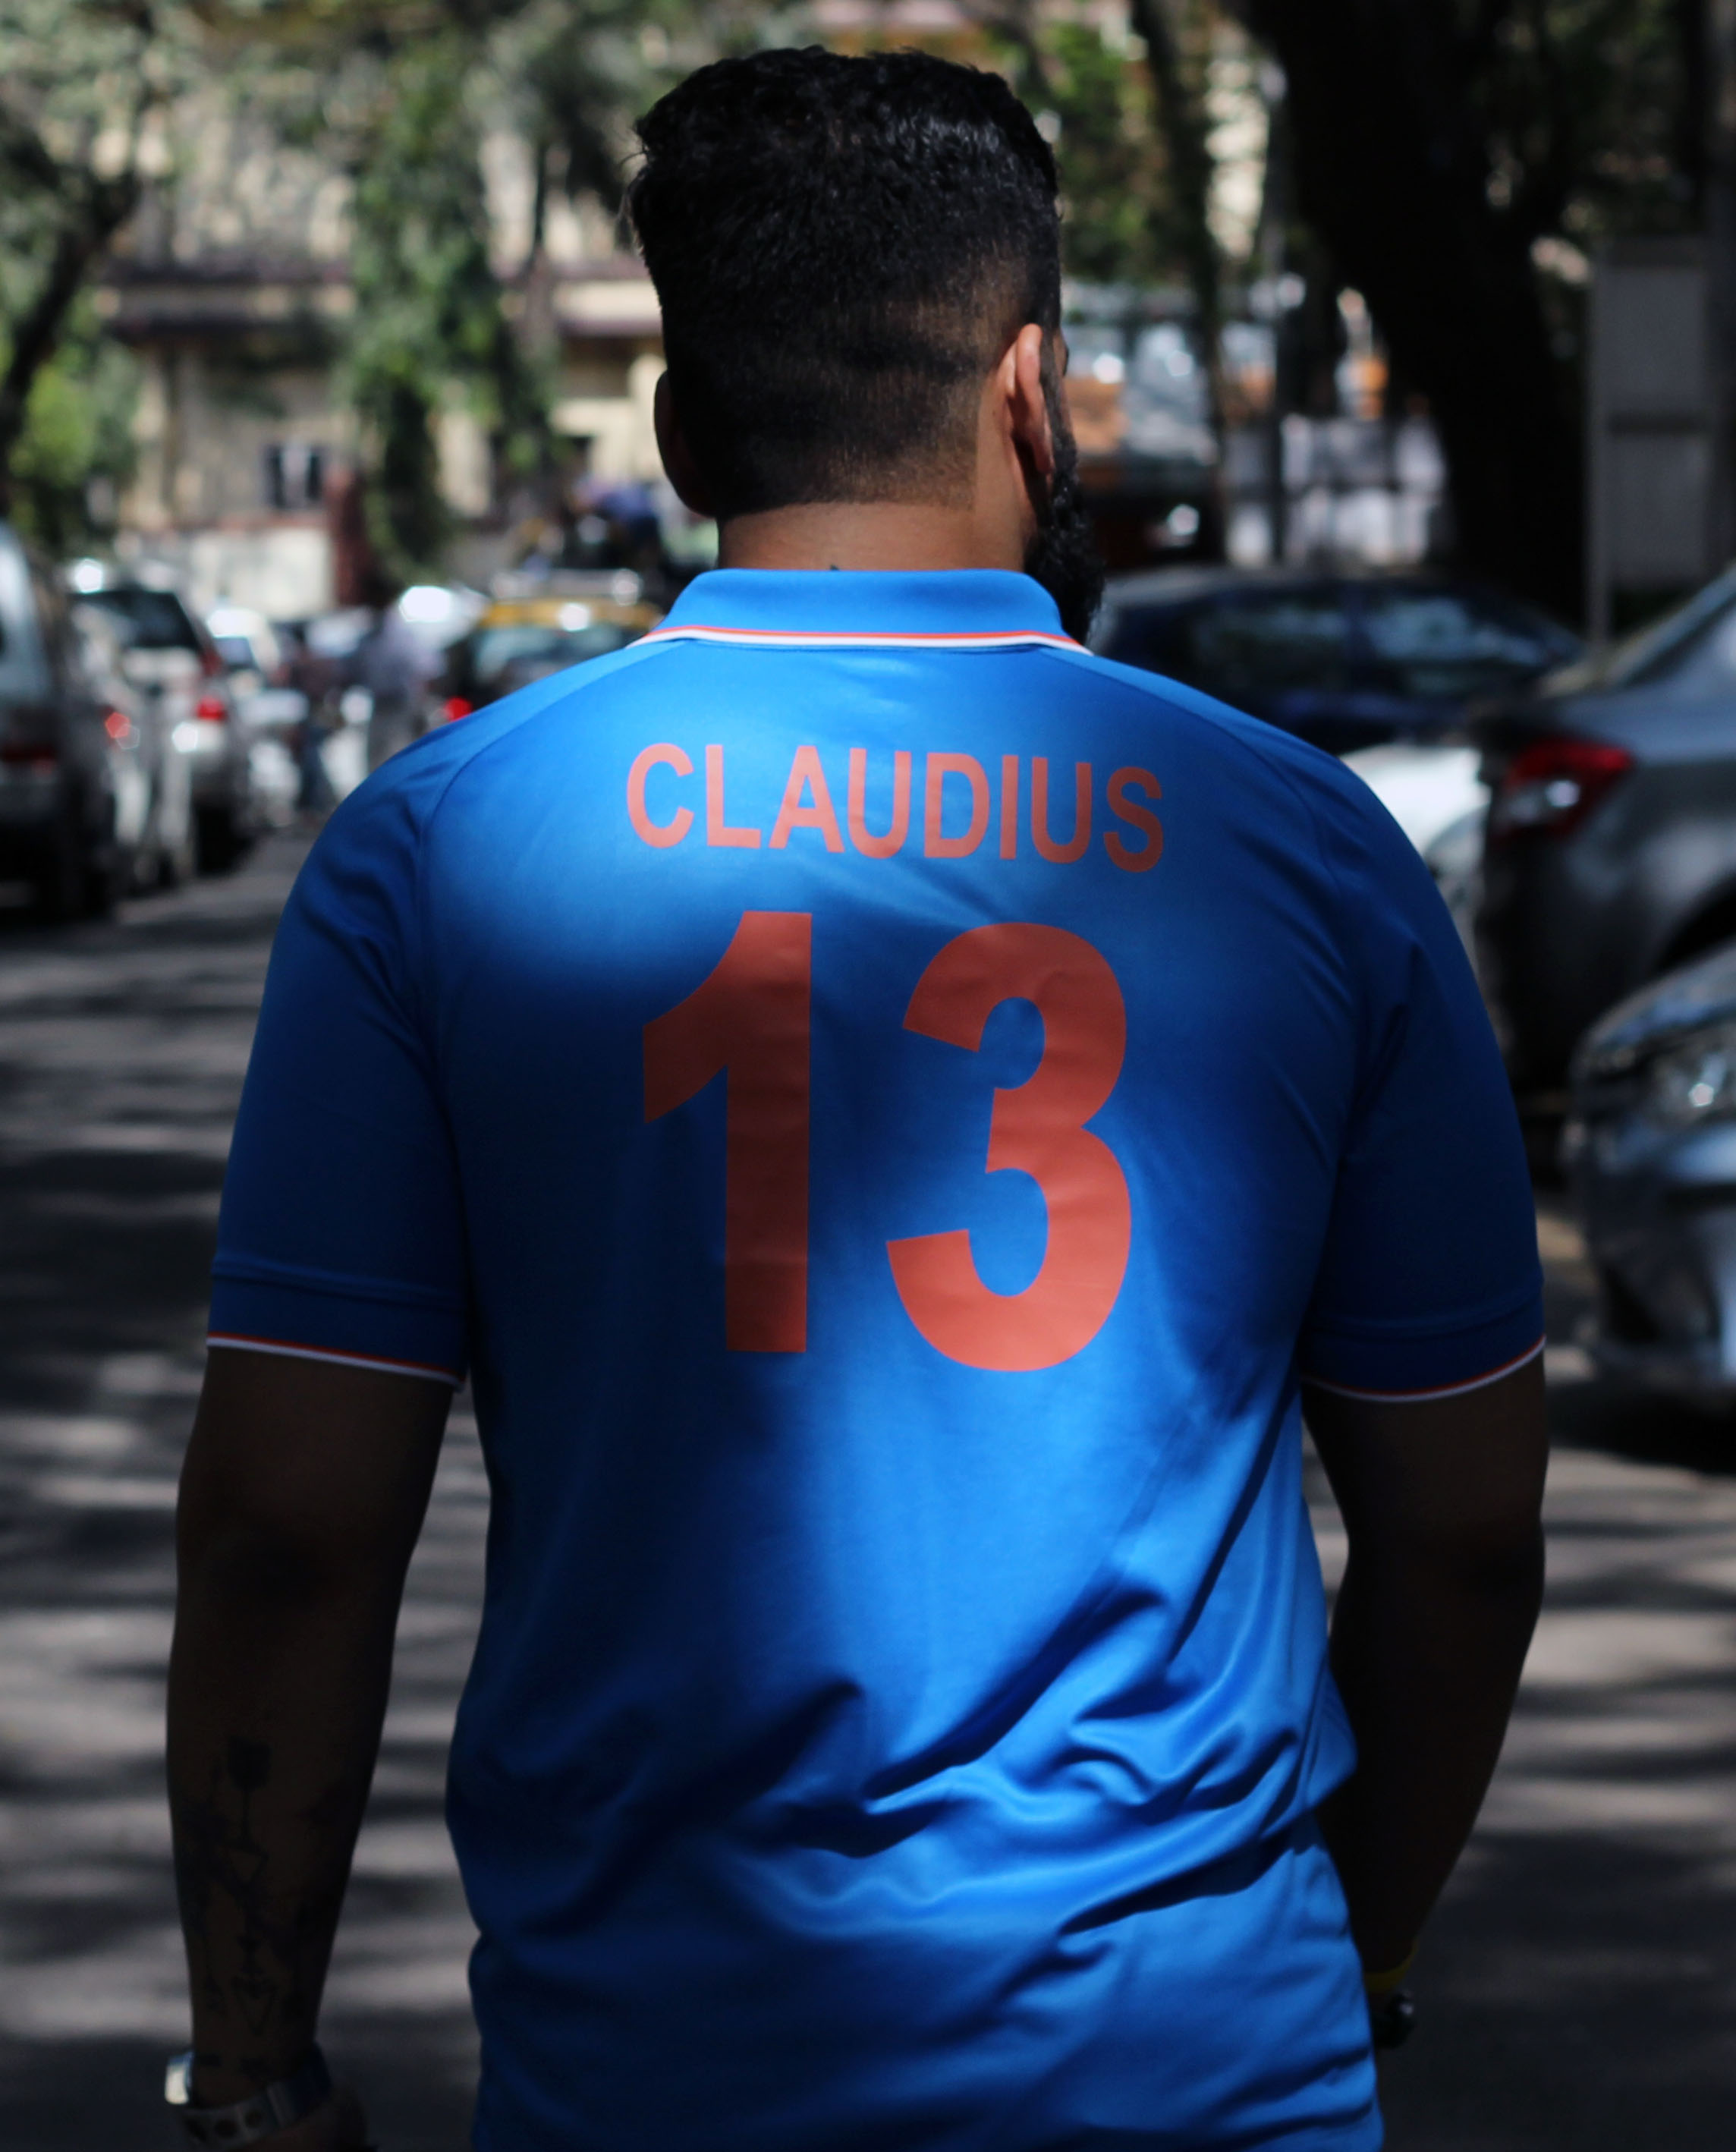 buy indian cricket team jersey with my name